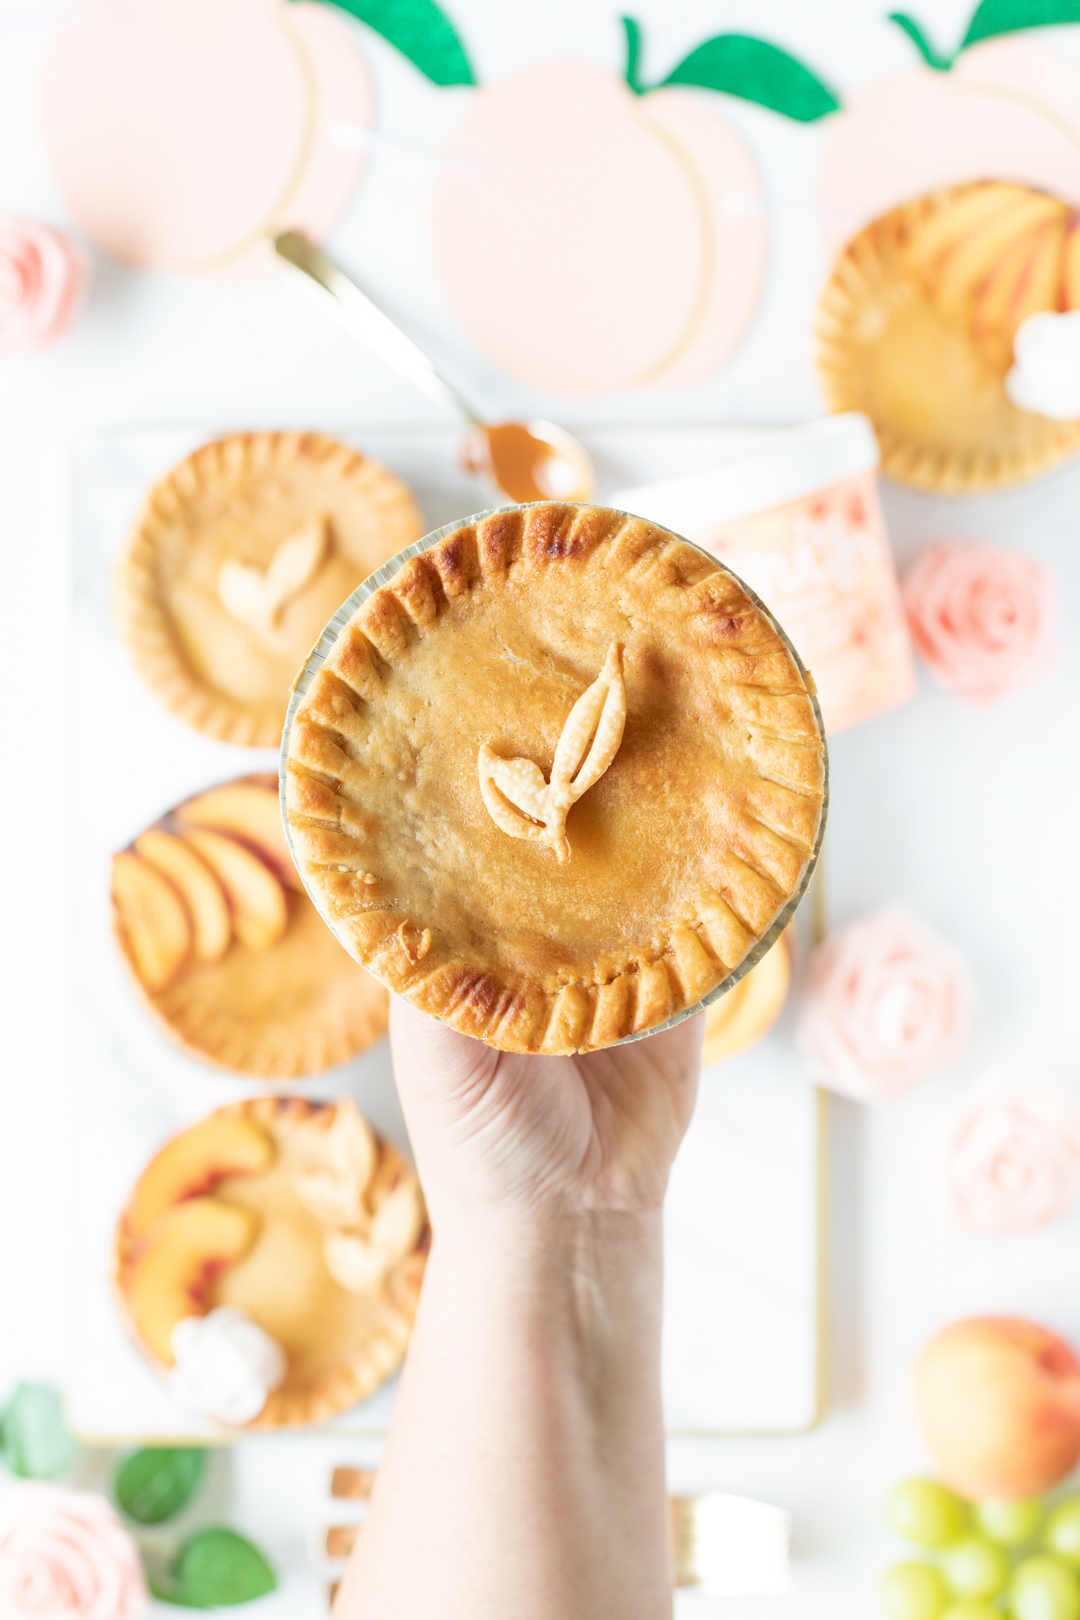 mini peach pie being held by woman's hand. Pretty leaf made out of pie crust on top.